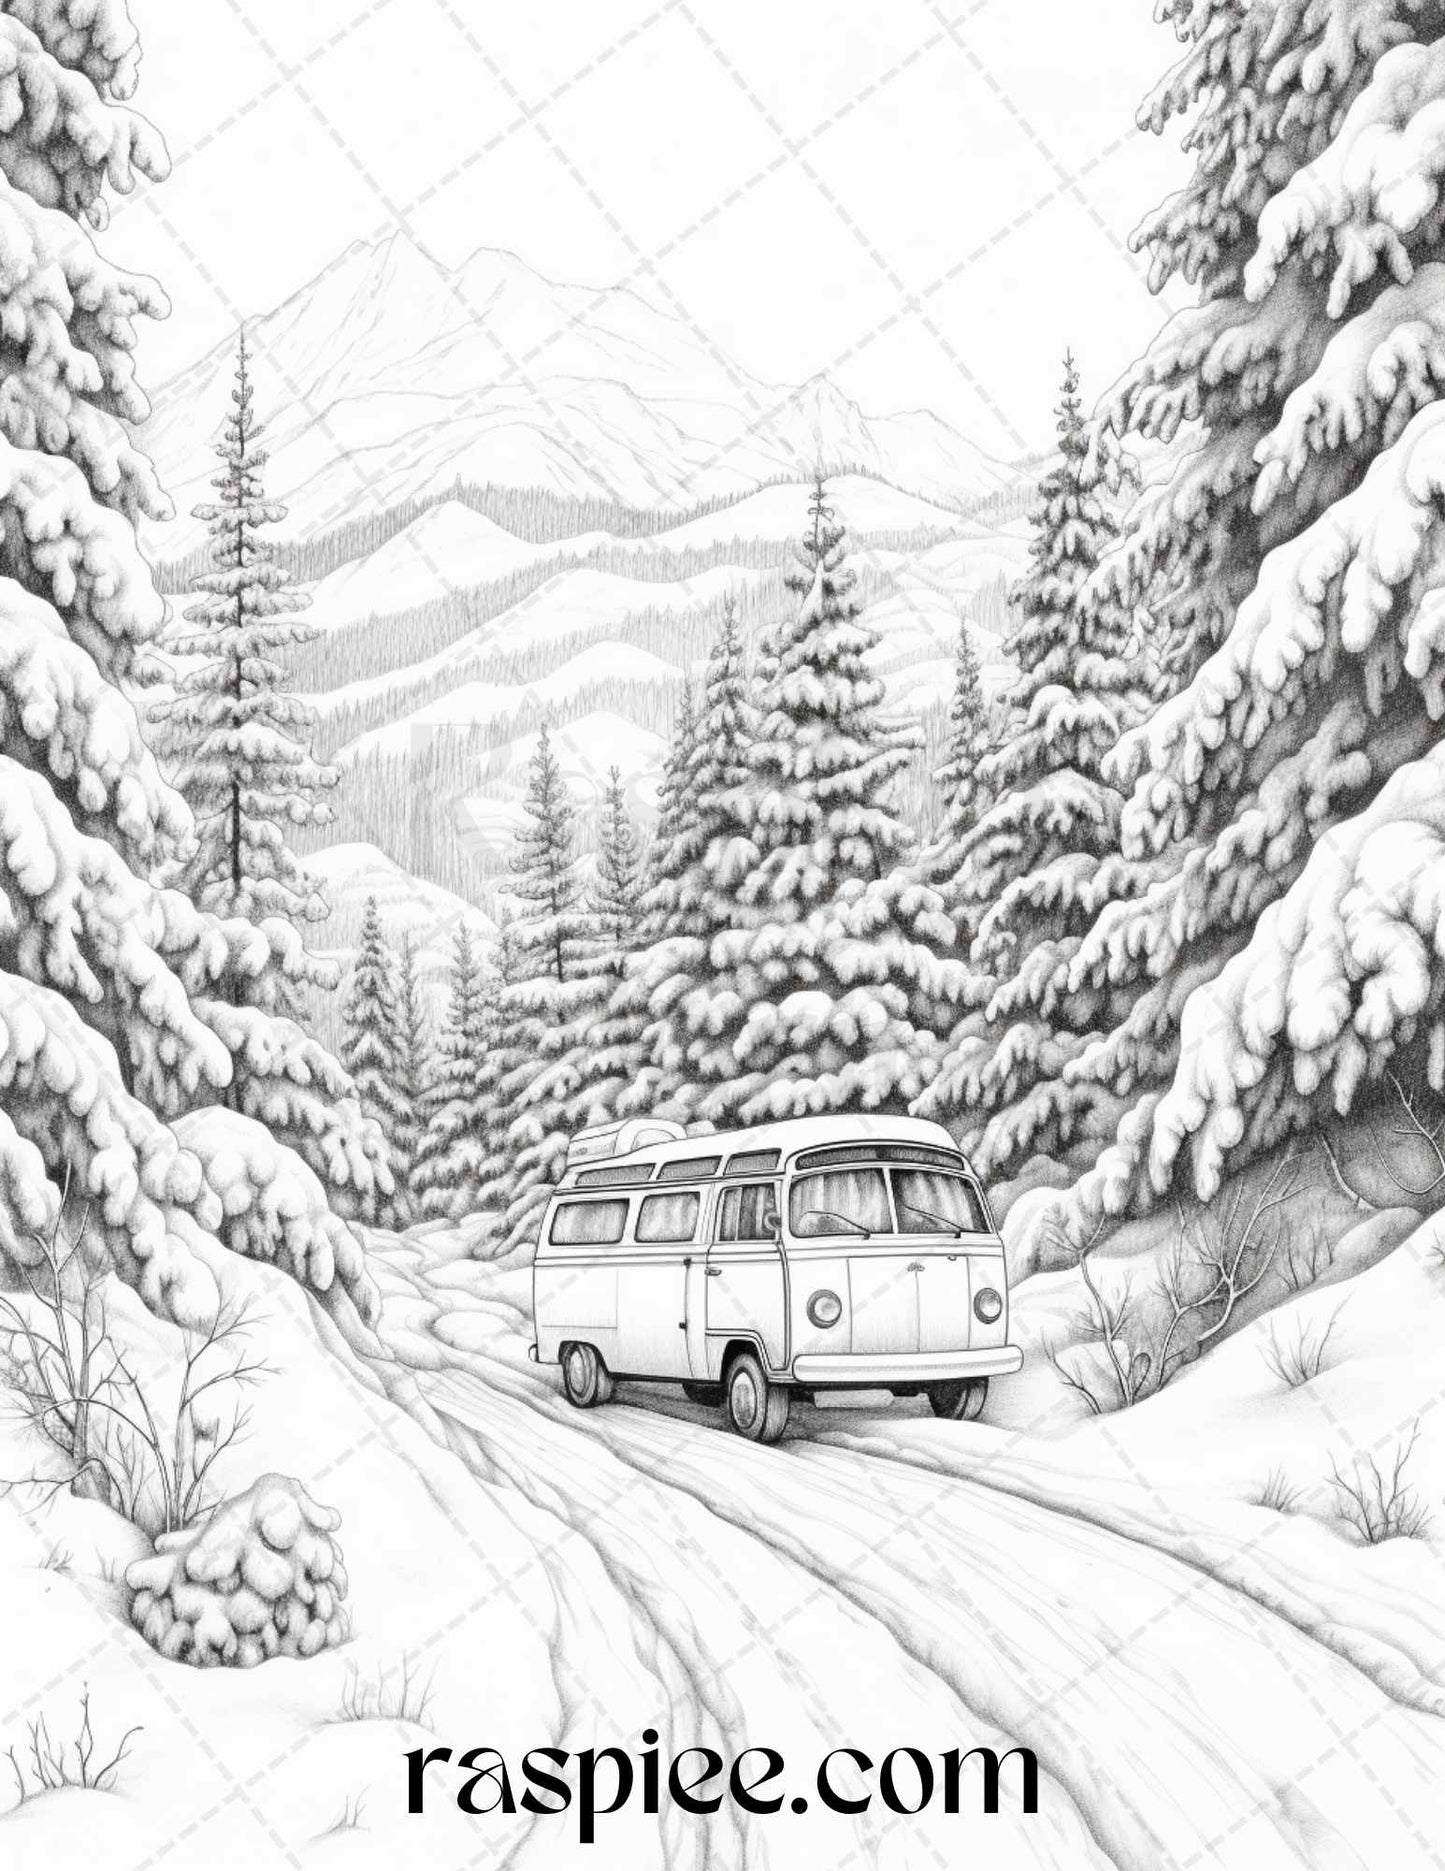 Winter Scenery Grayscale Coloring Pages Printable, Relaxing Snowy Landscapes, PDF File Instant Download - Raspiee Coloring